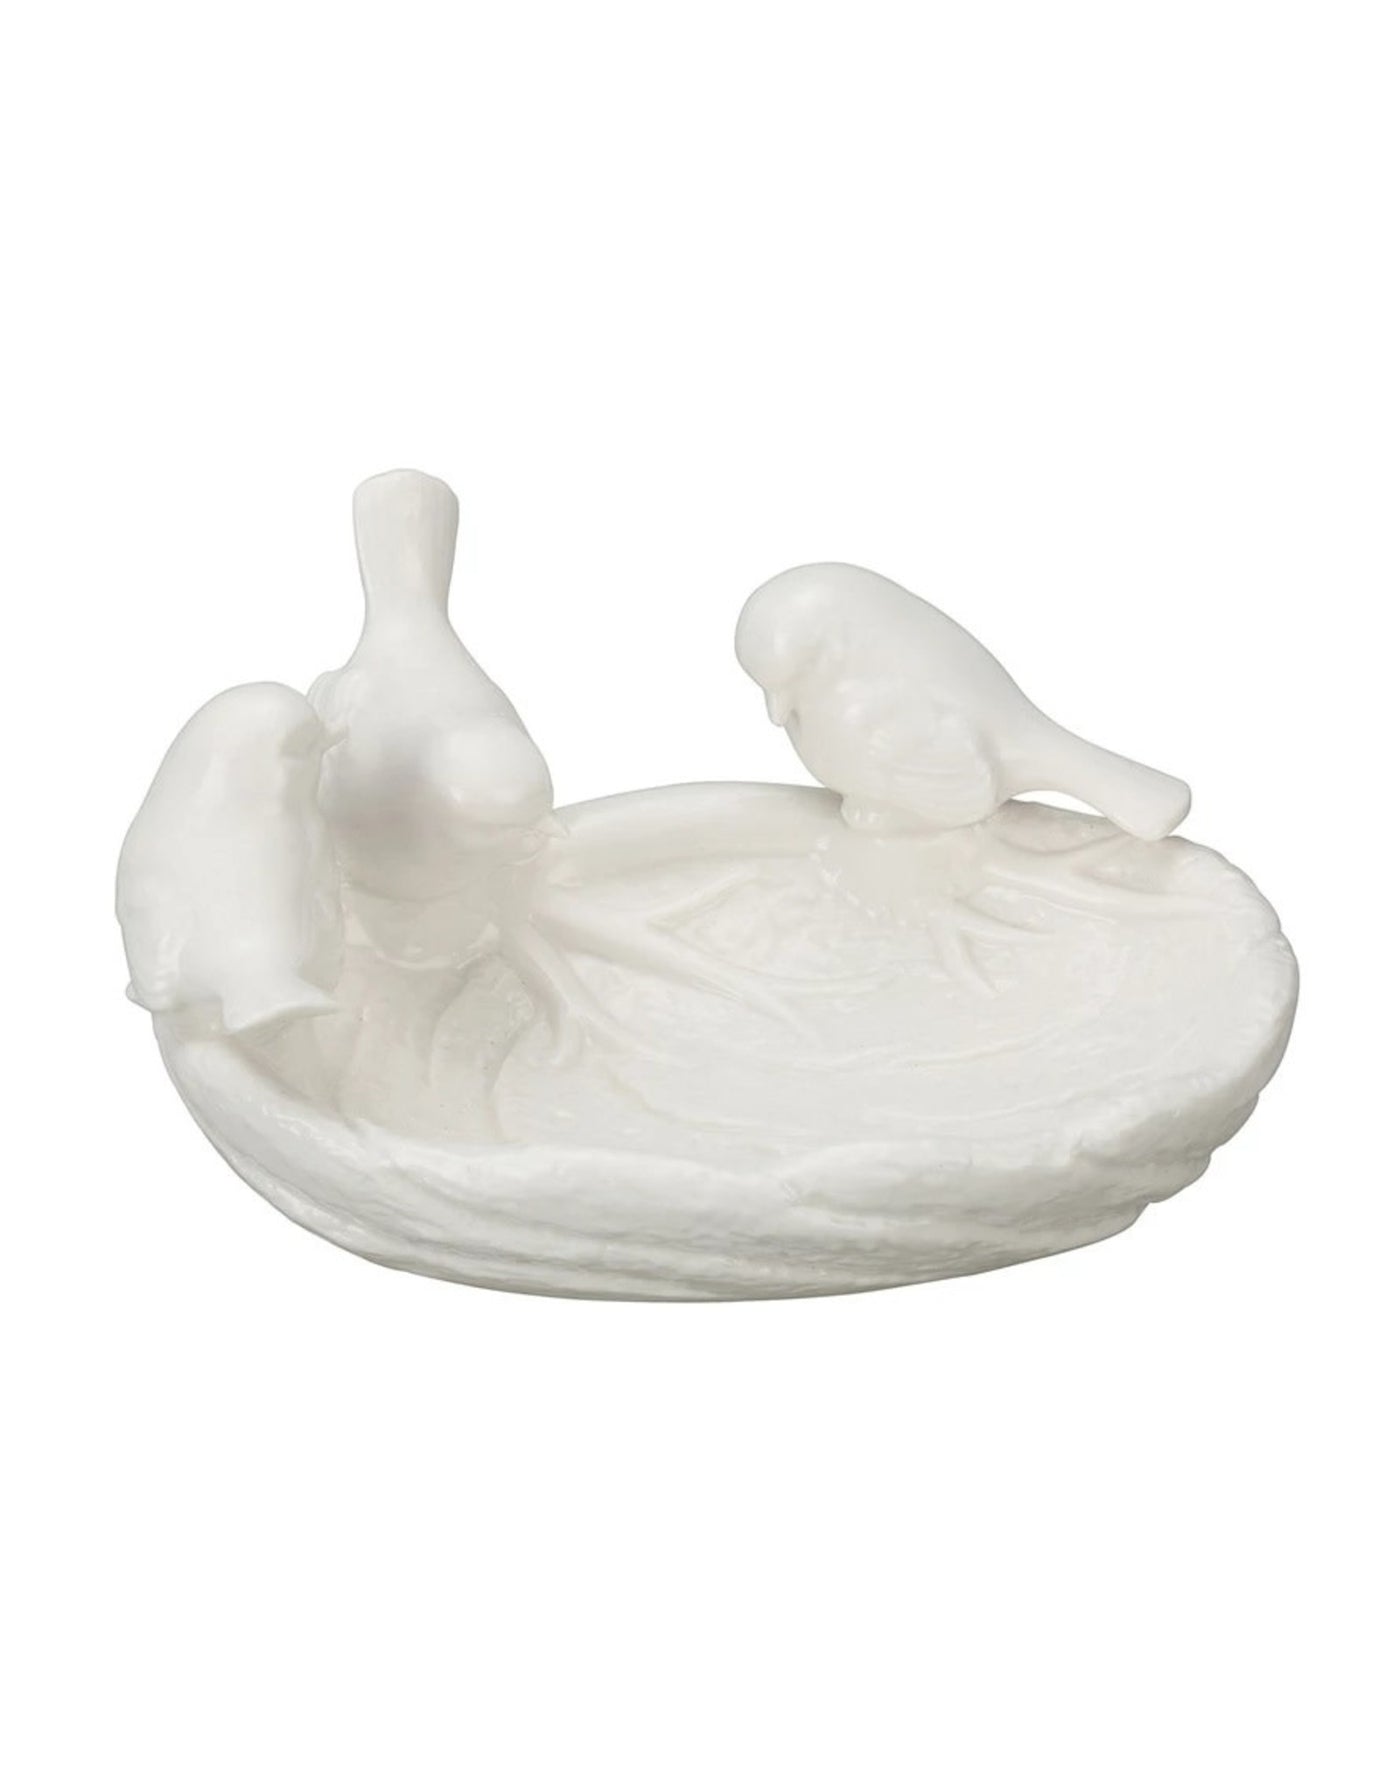 Decorative Ceramic Leaf Dish with Birds Available at Davis Porch and Patio Weatherford Texas